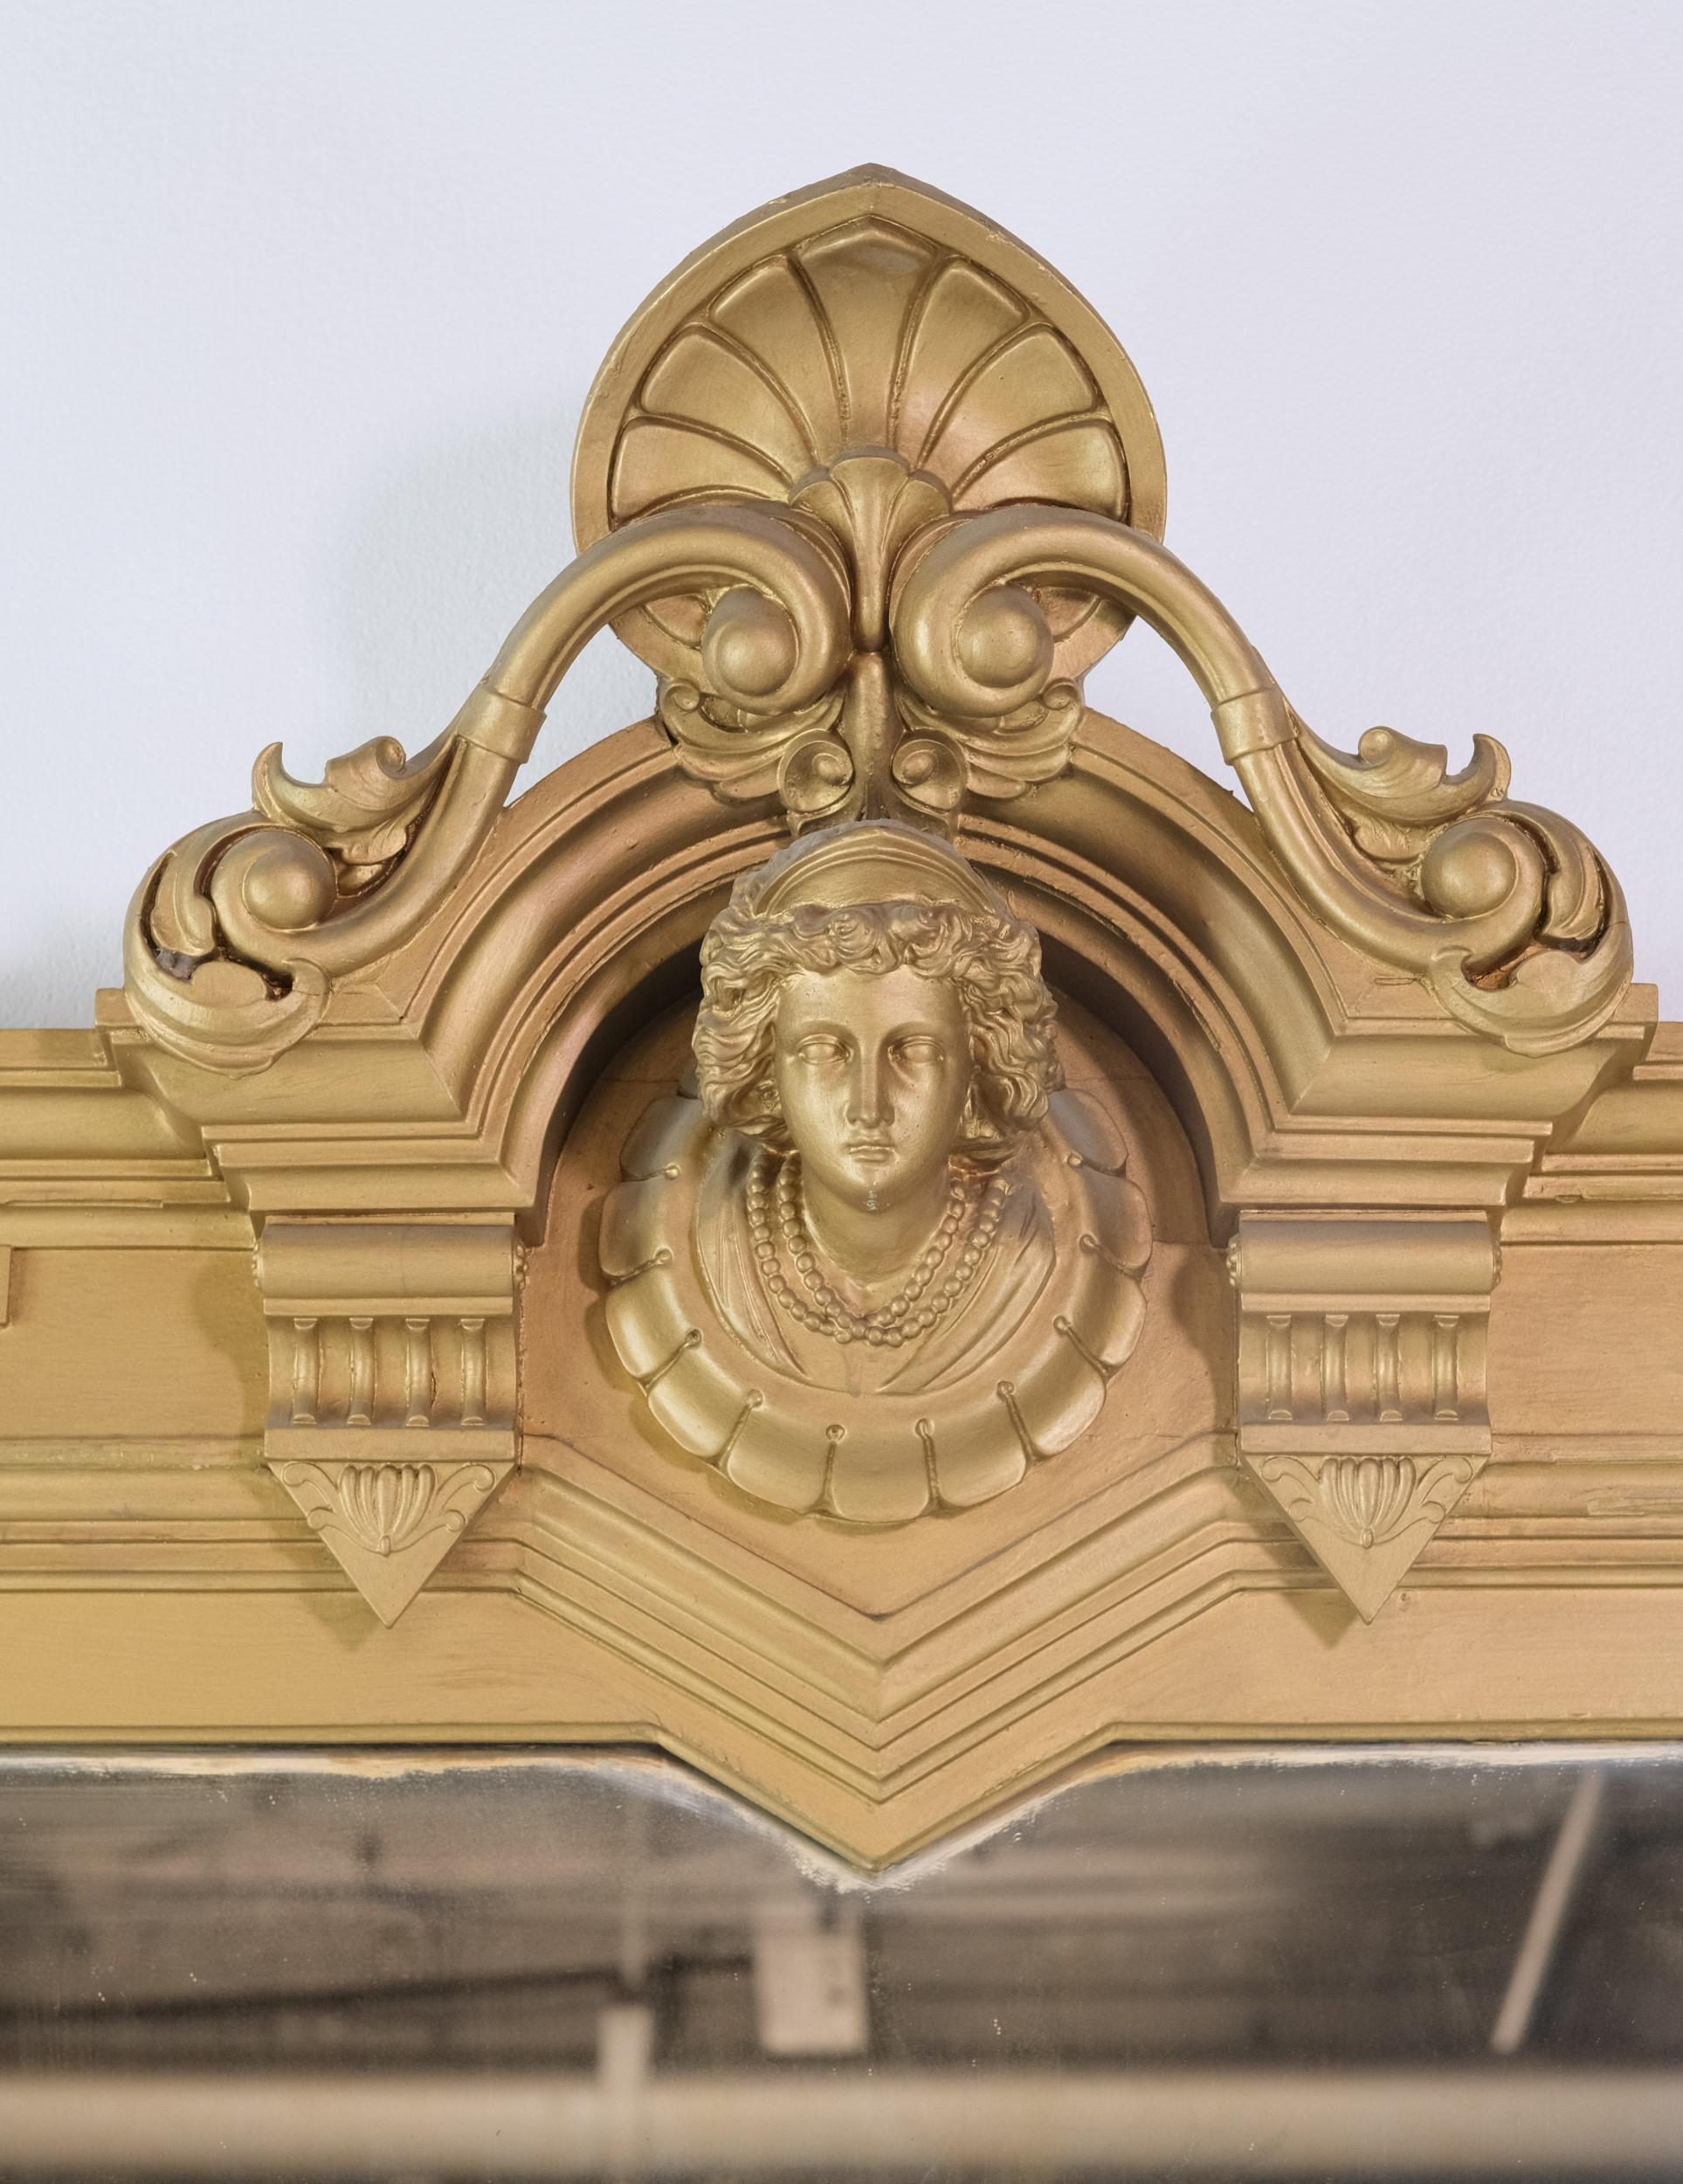 Victorian gilded over mantel mirror with exquisite carved figural and floral details.  Some of the details are carved in gesso.  This stunning over mantel with intricate details has a very grand size. Please note, this item is located in our